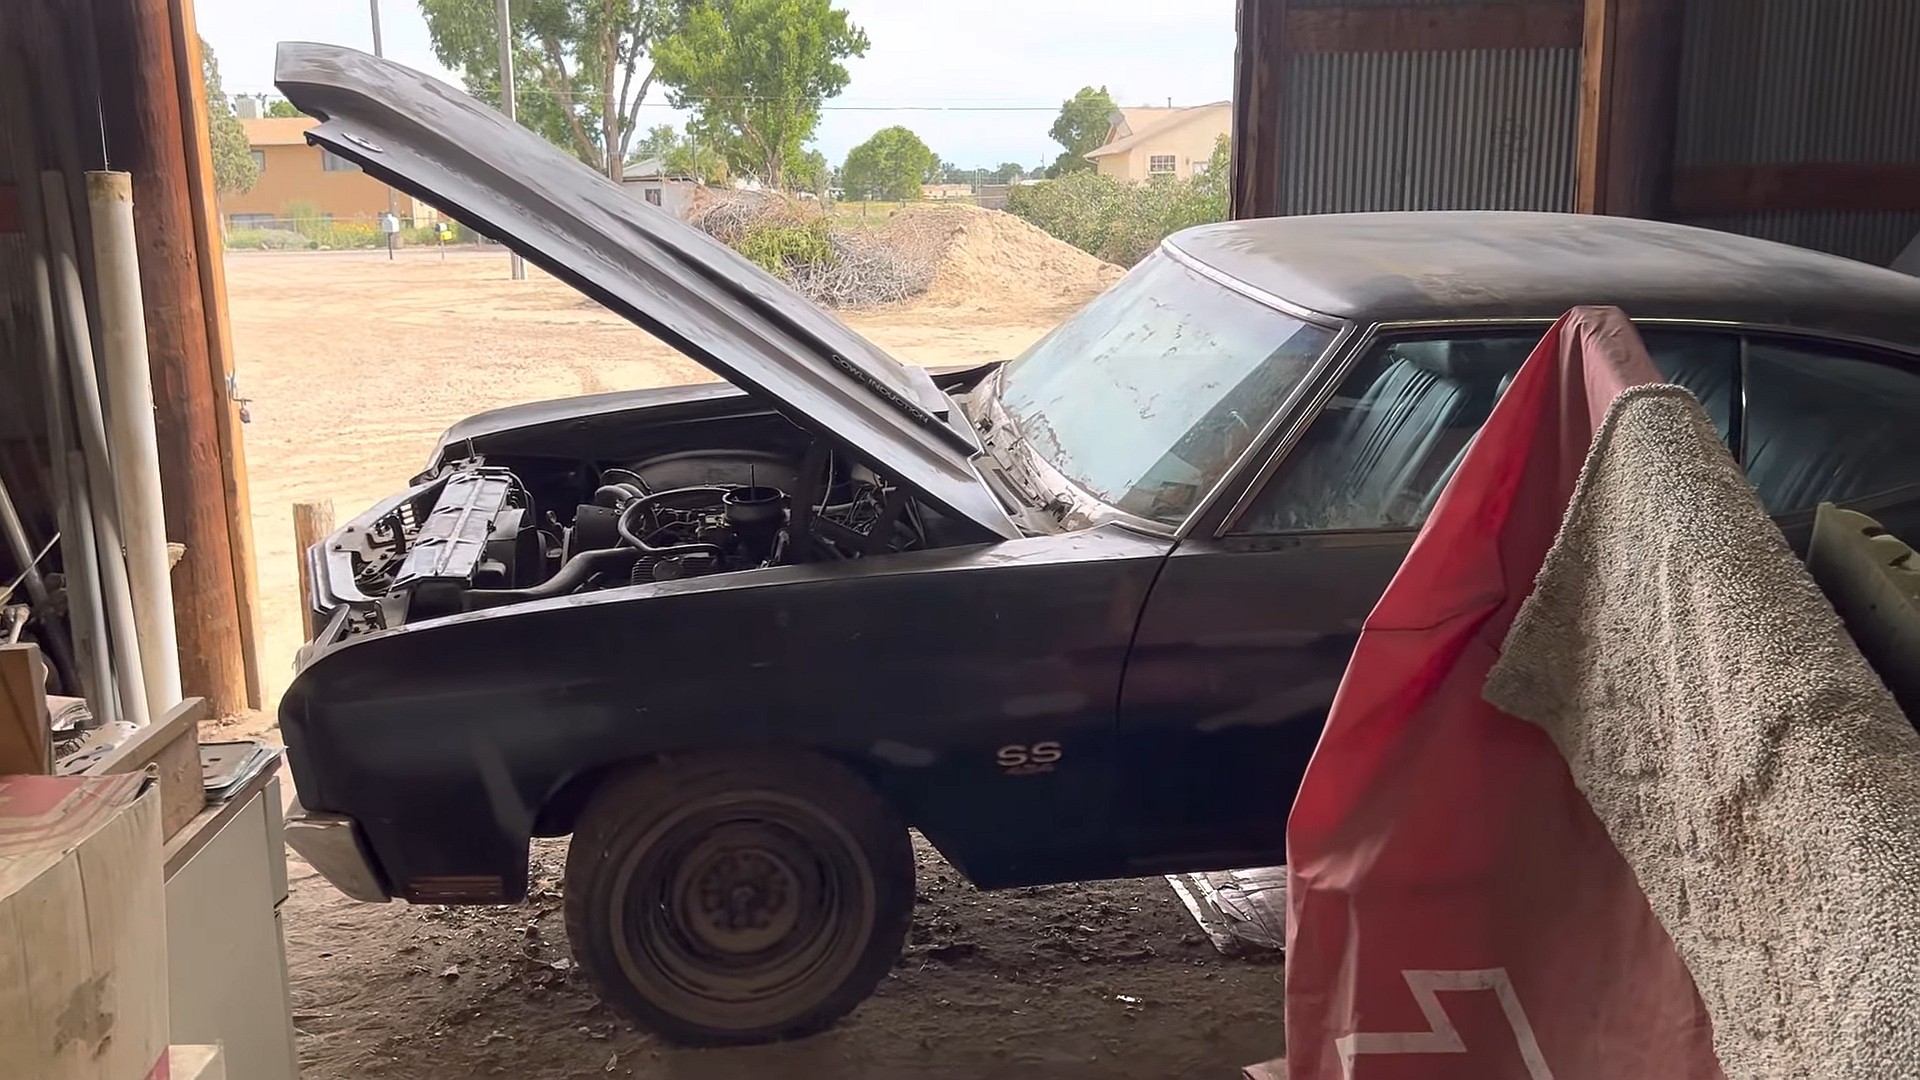 1970 chevrolet chevelle discovered after 43 years in a barn it s a holy grail ls6 7